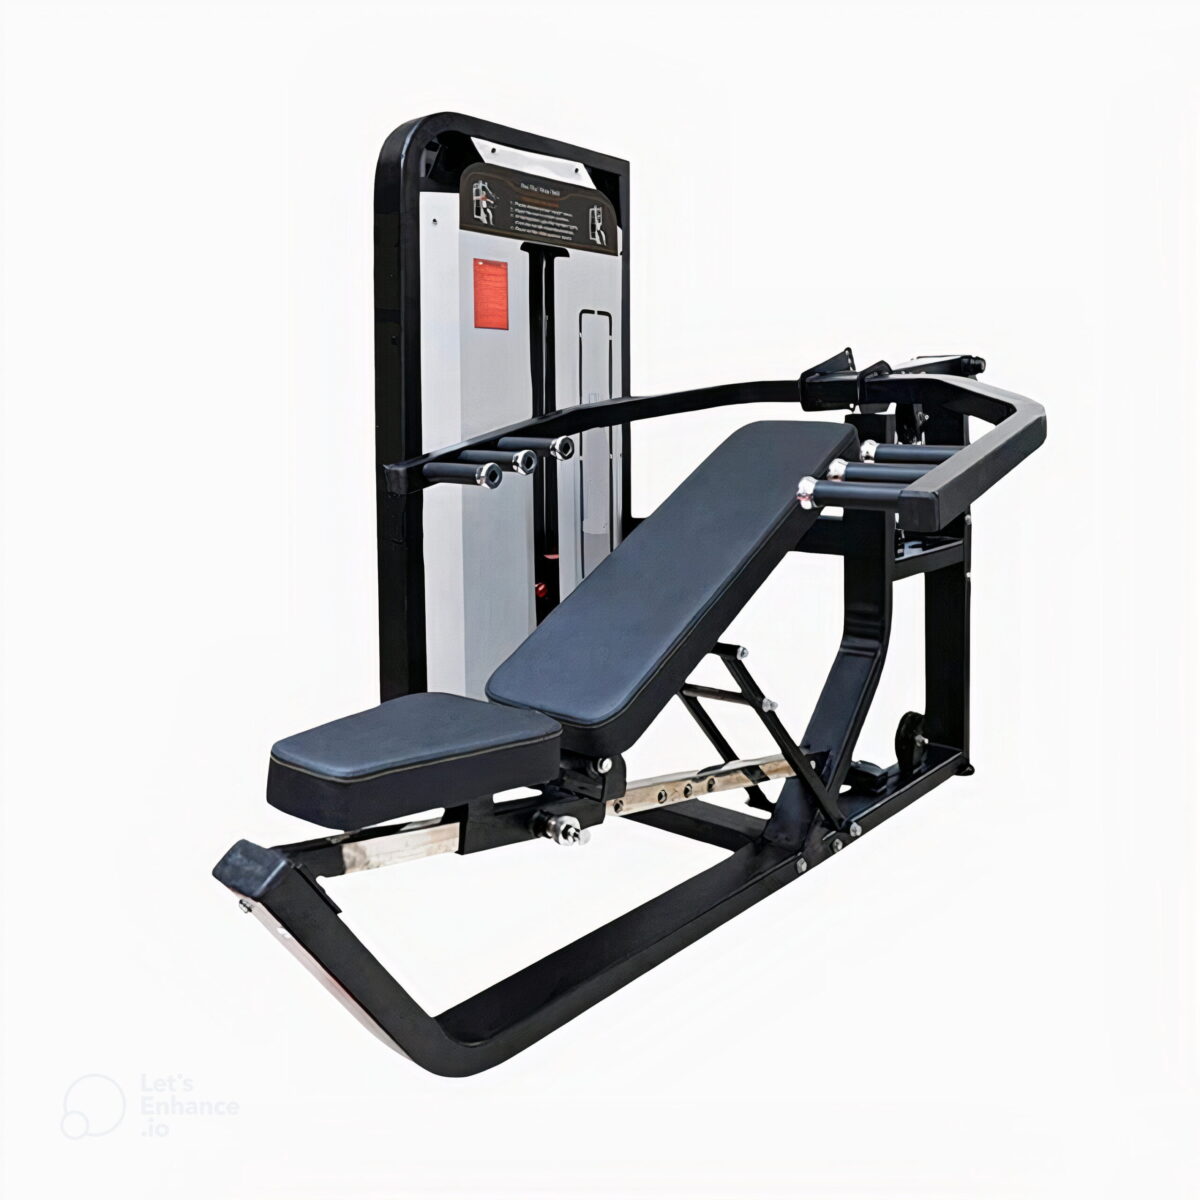 A sleek, modern Incline Chest and Shoulder Press Machine designed for targeted upper body workouts.